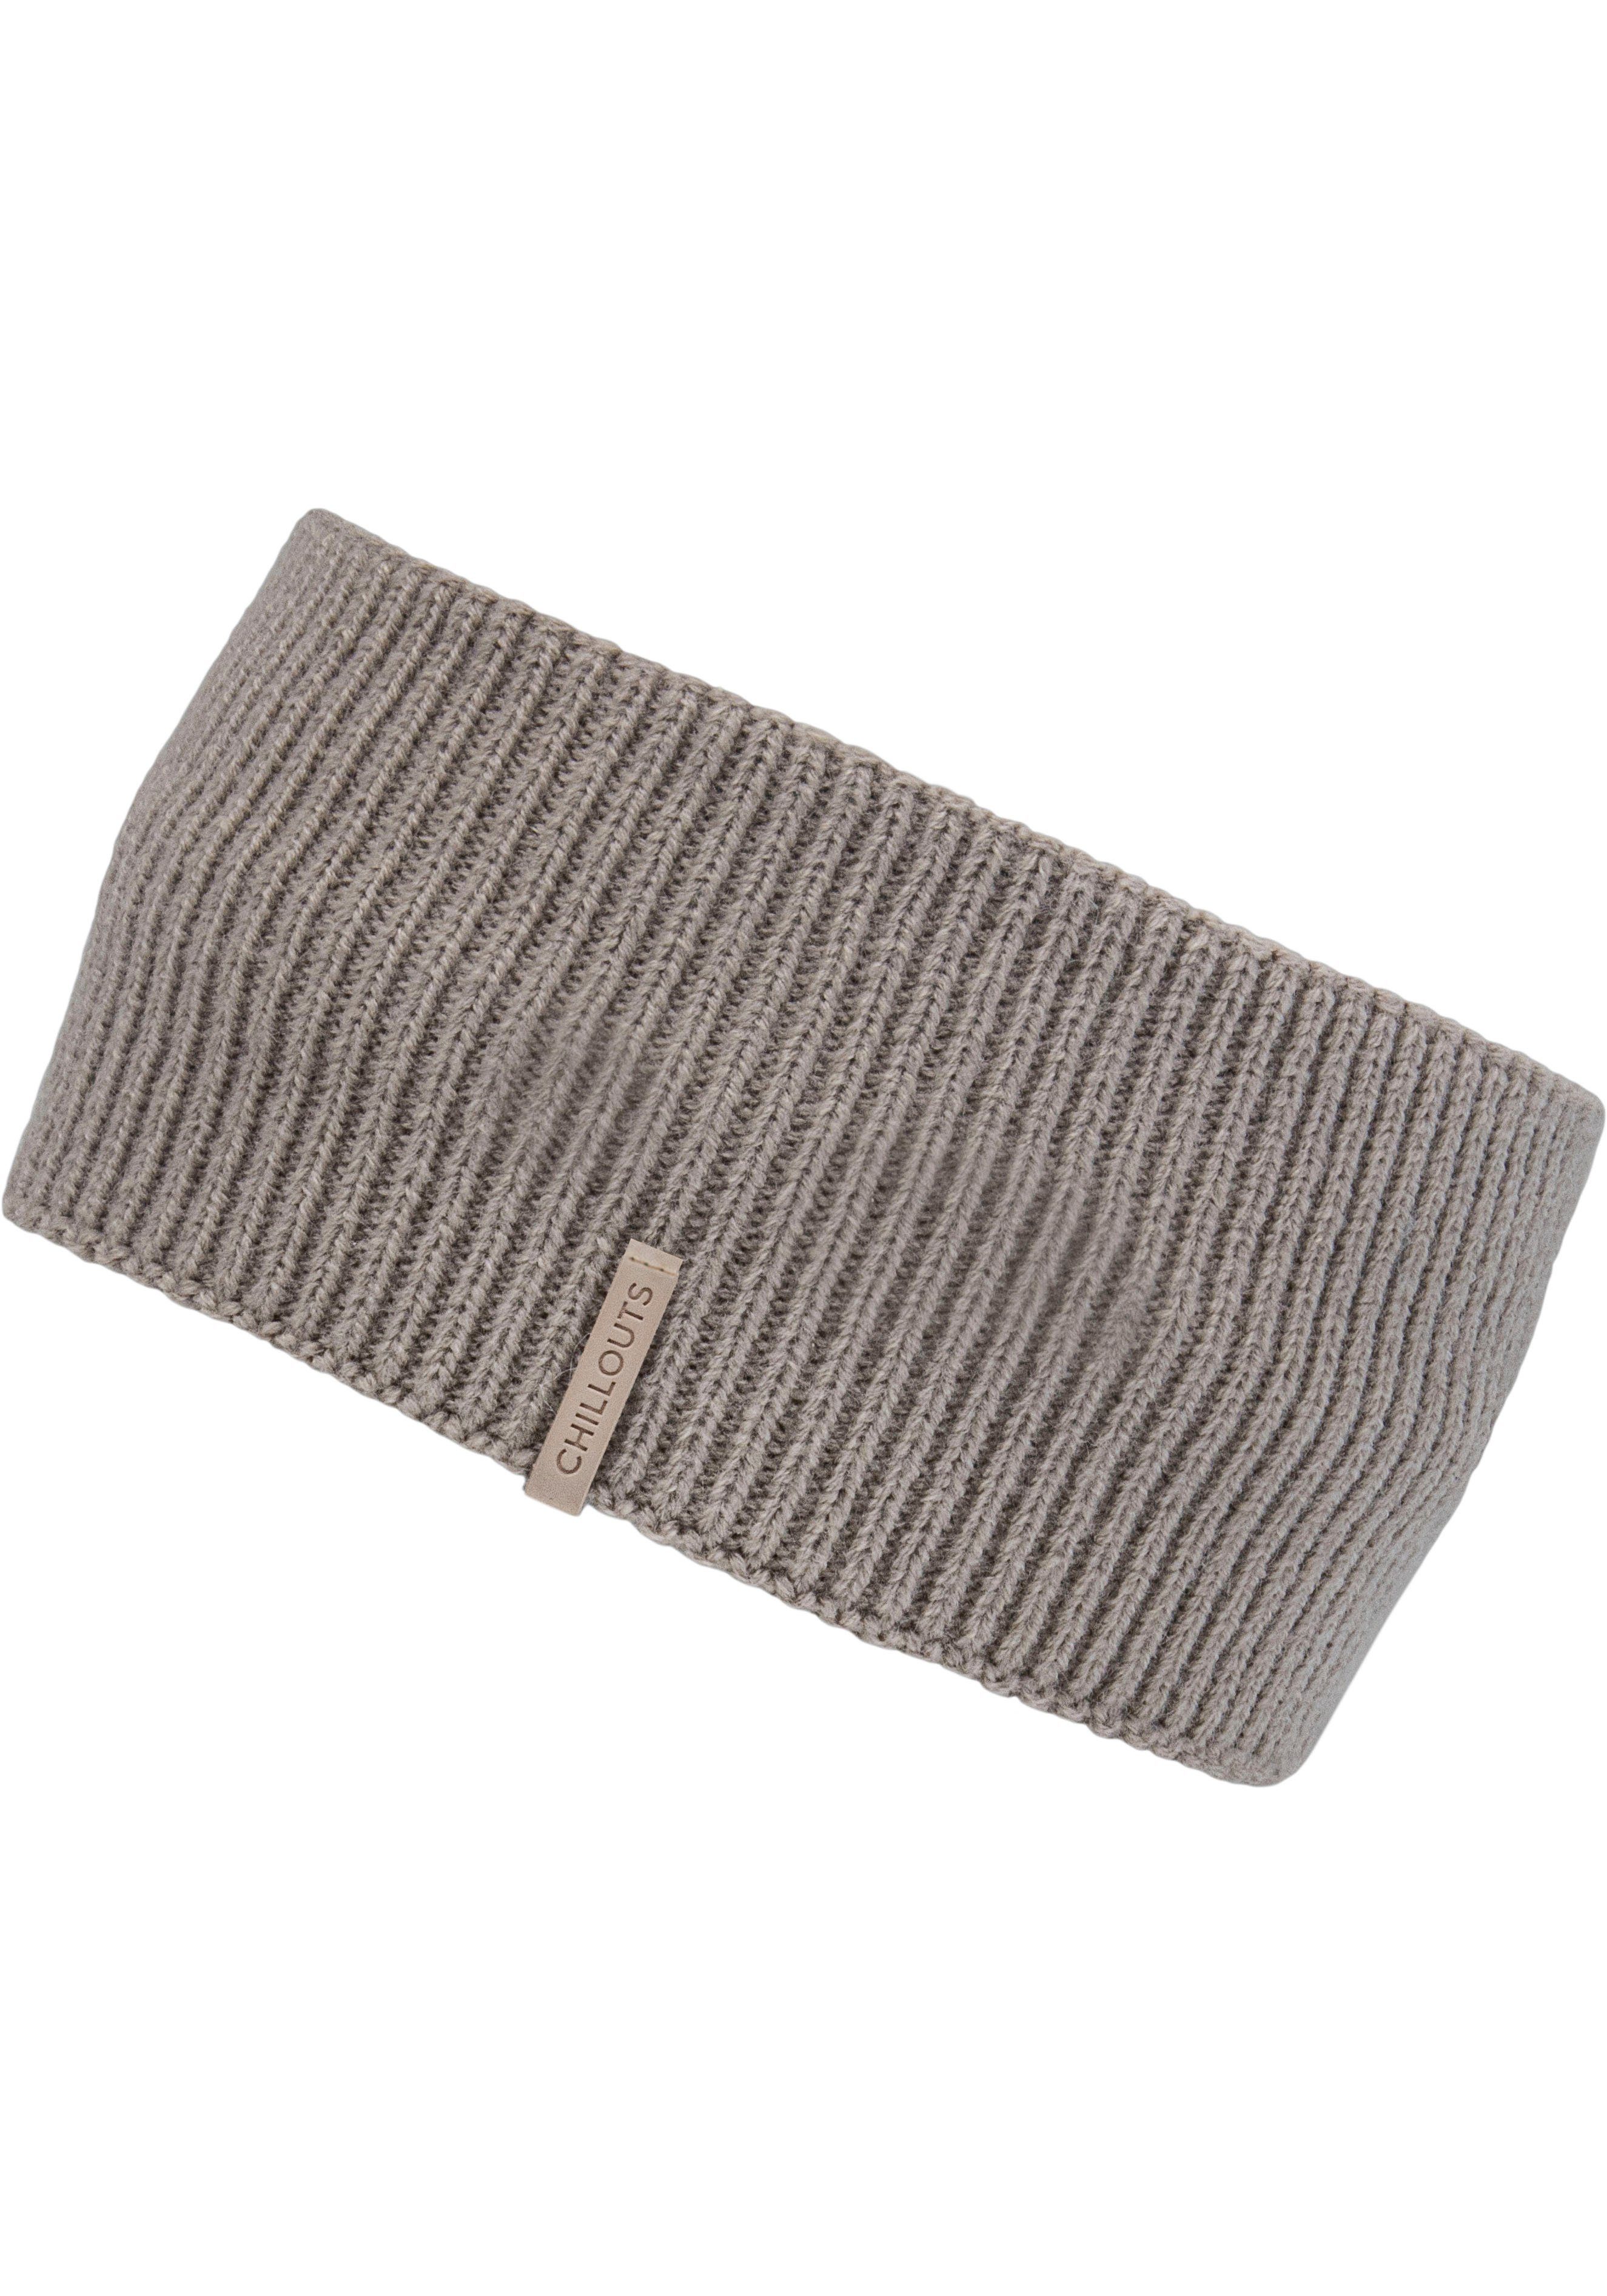 Stirnband Trendiges Ida taupe chillouts Headband Accessoire